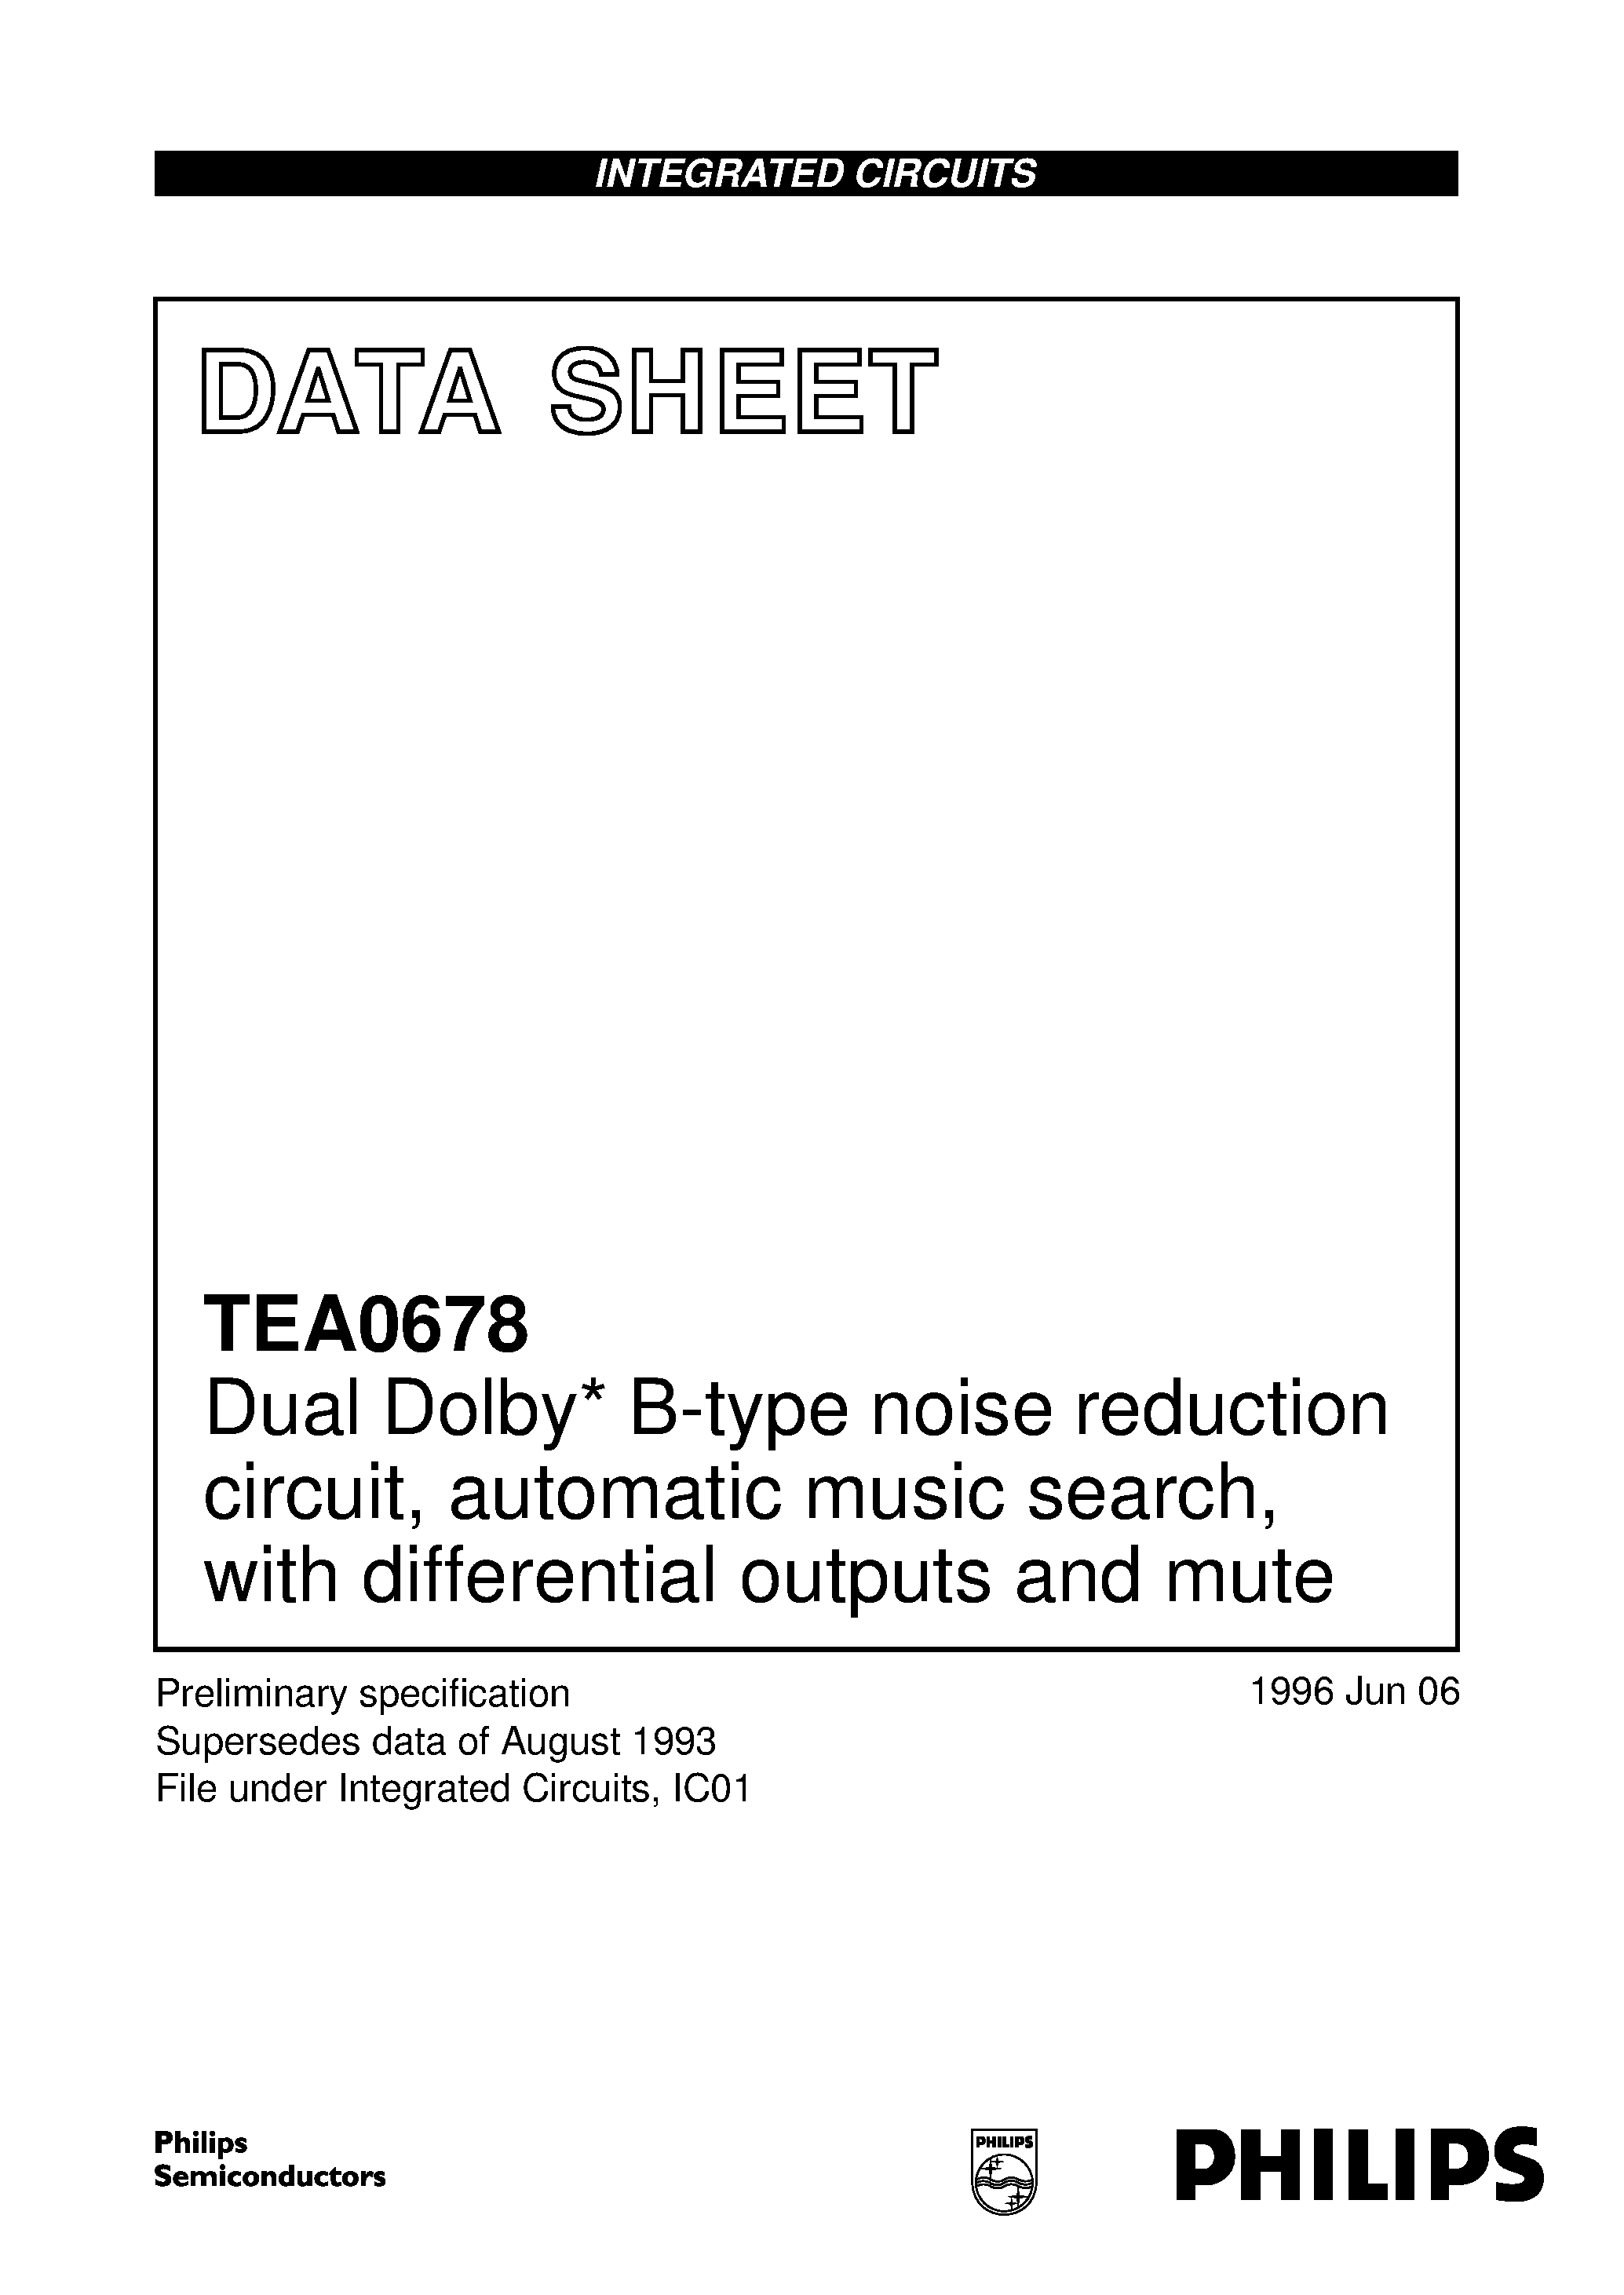 Datasheet TEA0678 - Dual Dolby* B-type noise reduction circuit/ automatic music search/ with differential outputs and mute page 1